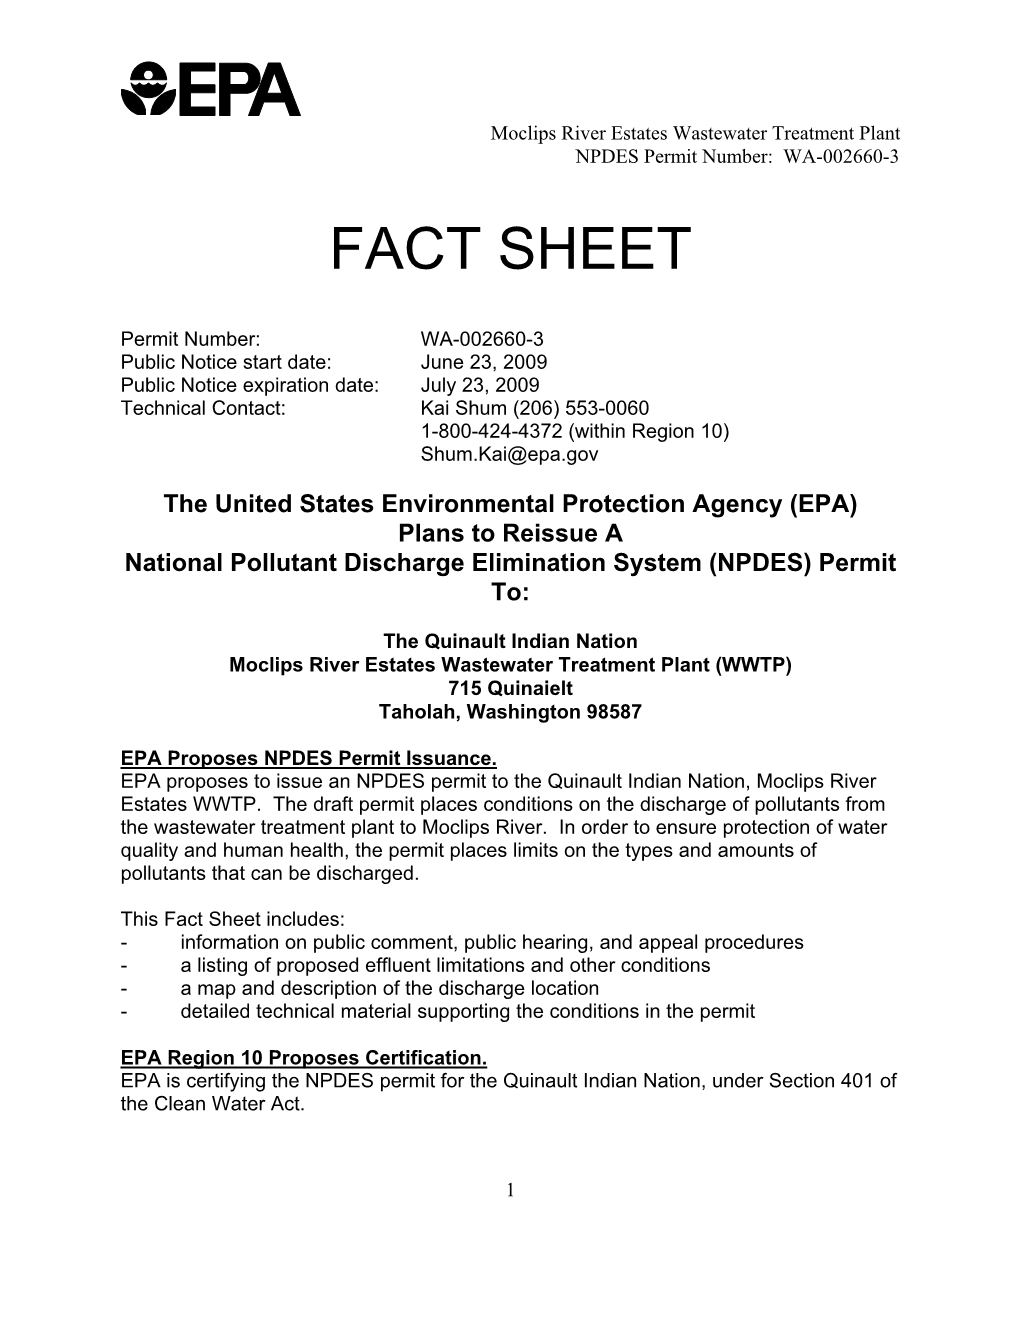 Fact Sheet for the Draft NPDES Permit for Quinault Indian Nation Moclips